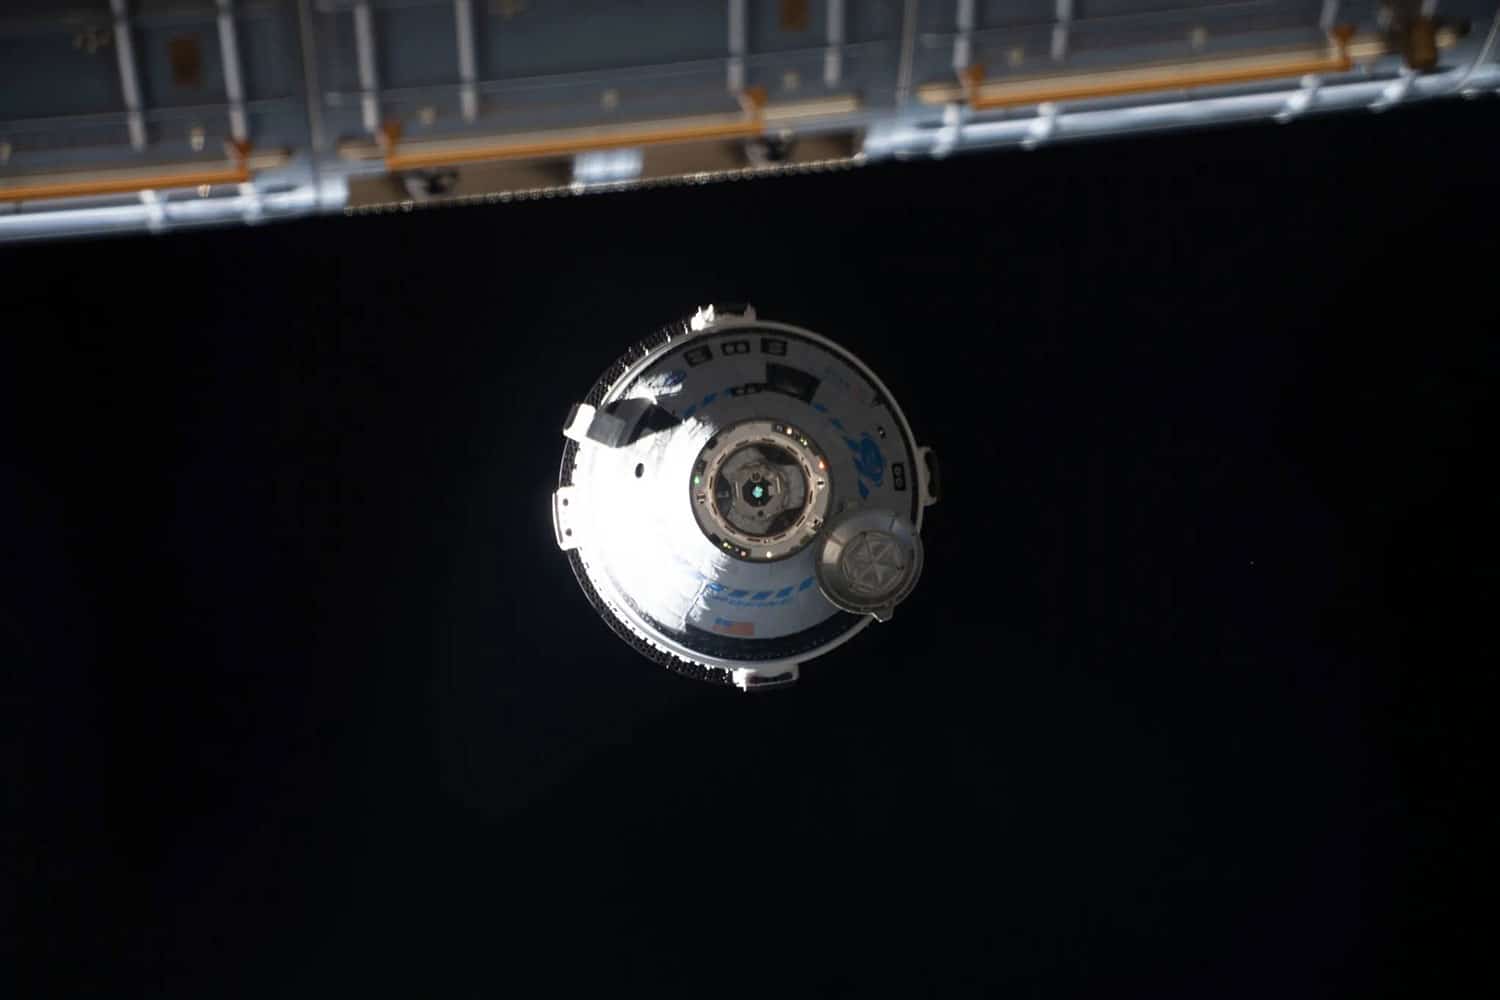 Boeing’s Starliner spacecraft approaches the International Space Station.